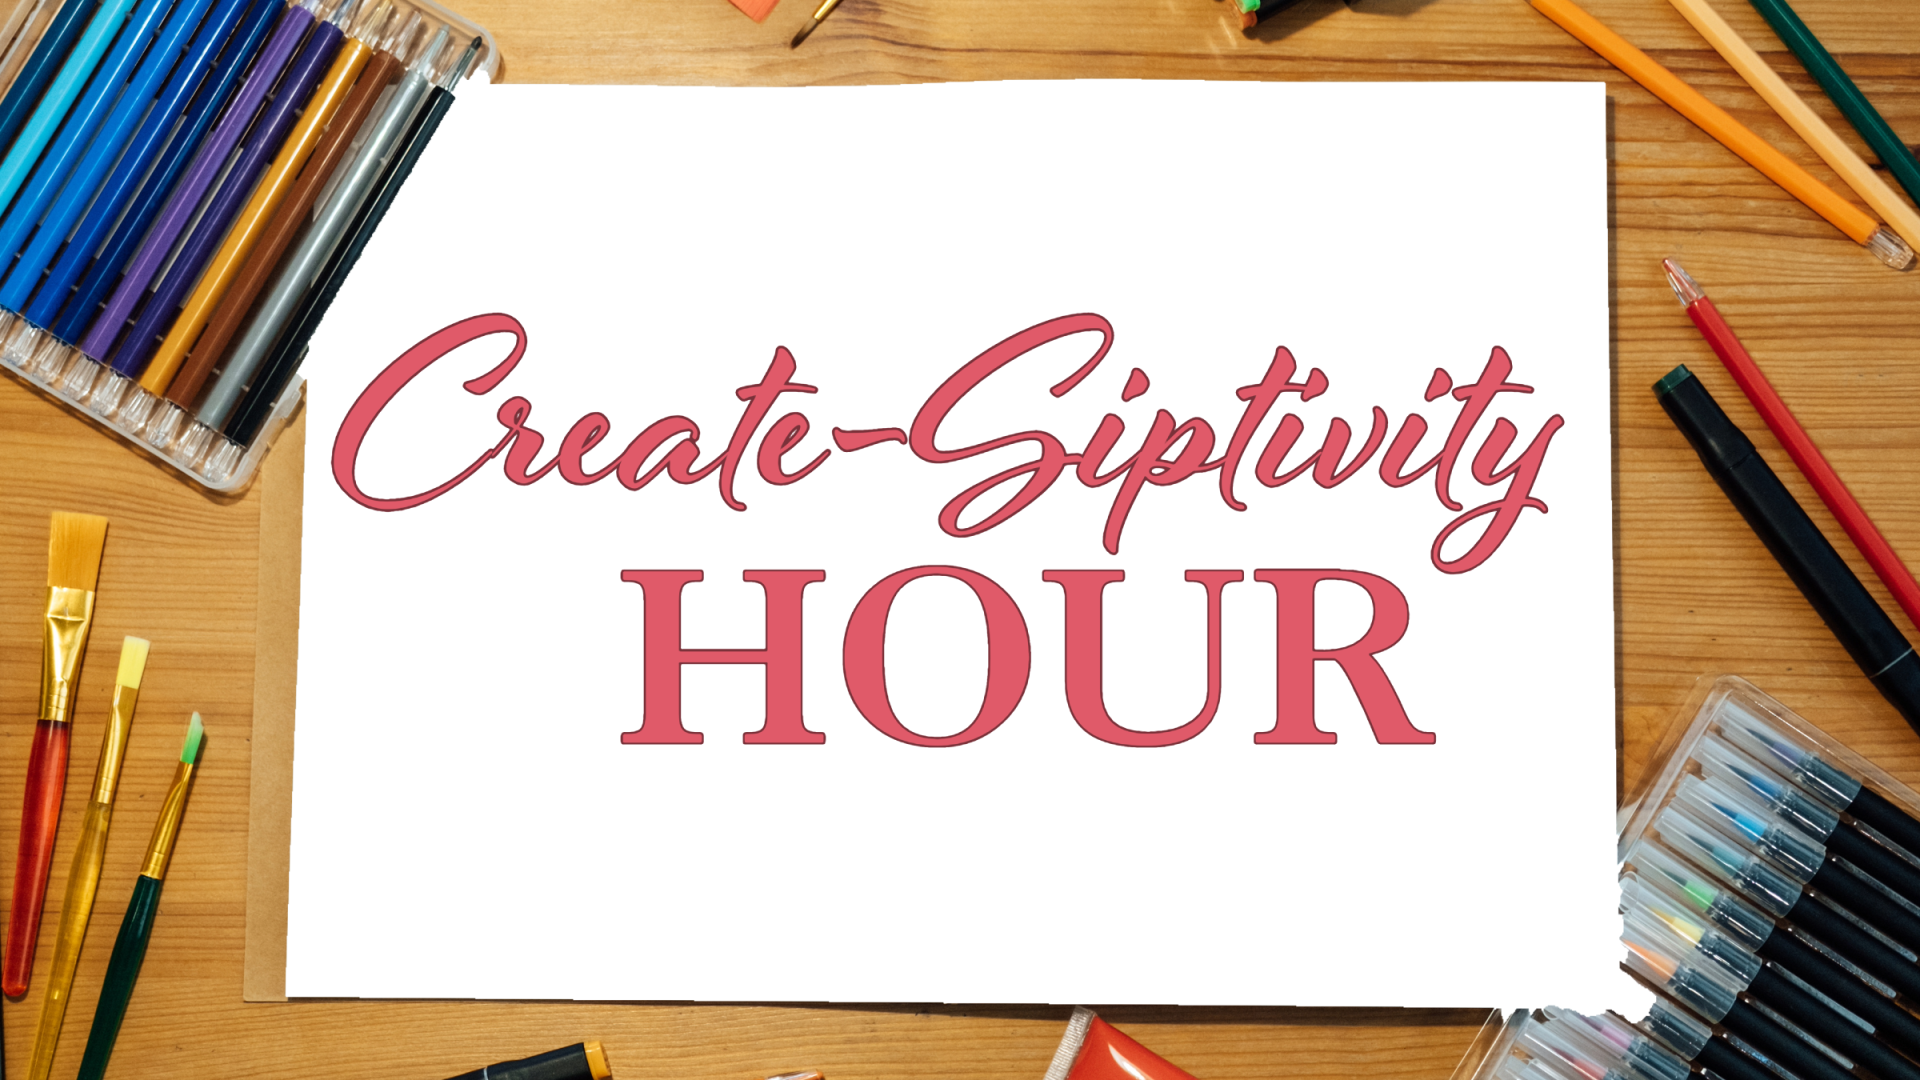 A big piece of paper on top of a desk with scattered art supplies around it. Written on the paper in a dark pink color is &quot;Create-Siptivity Hour&quot;